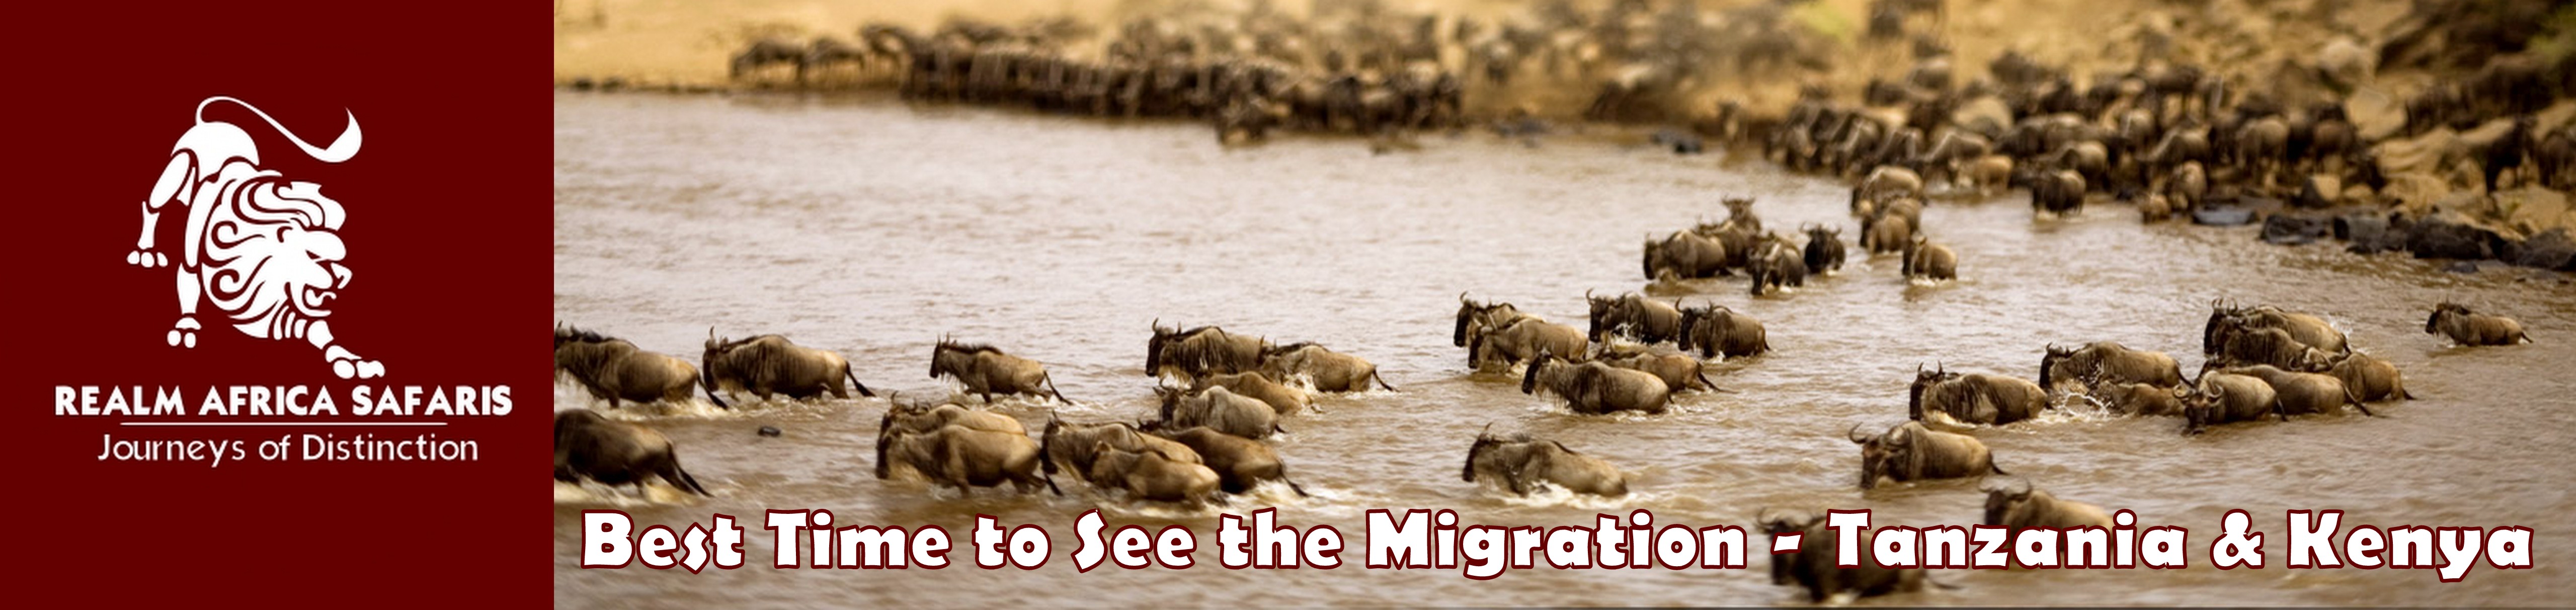 Best time to see the Wildebeest Migration